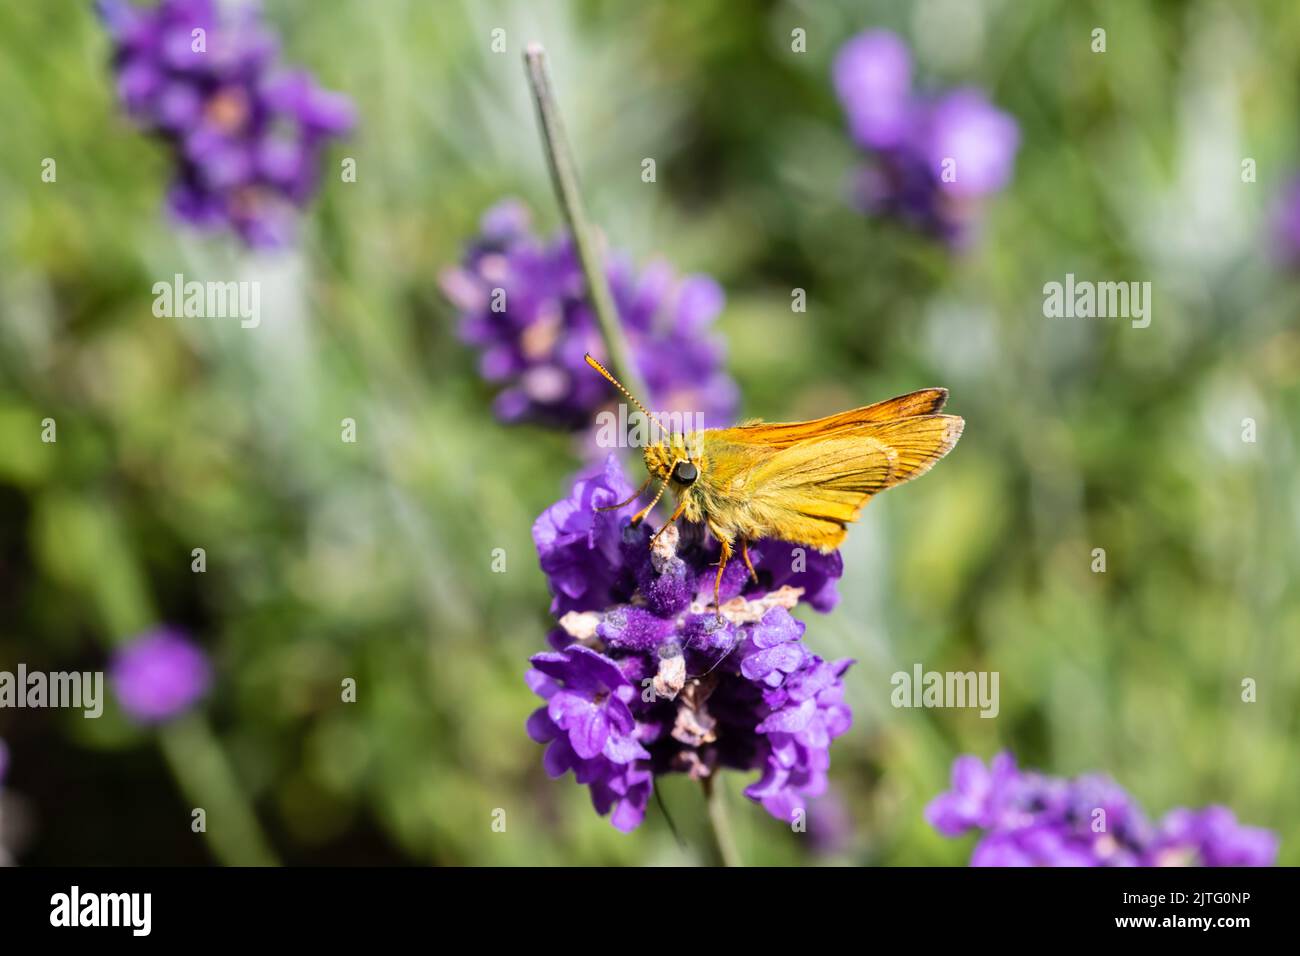 A small skipper butterfly, Thymelicus sylvestris, feeding on a flower. Stock Photo